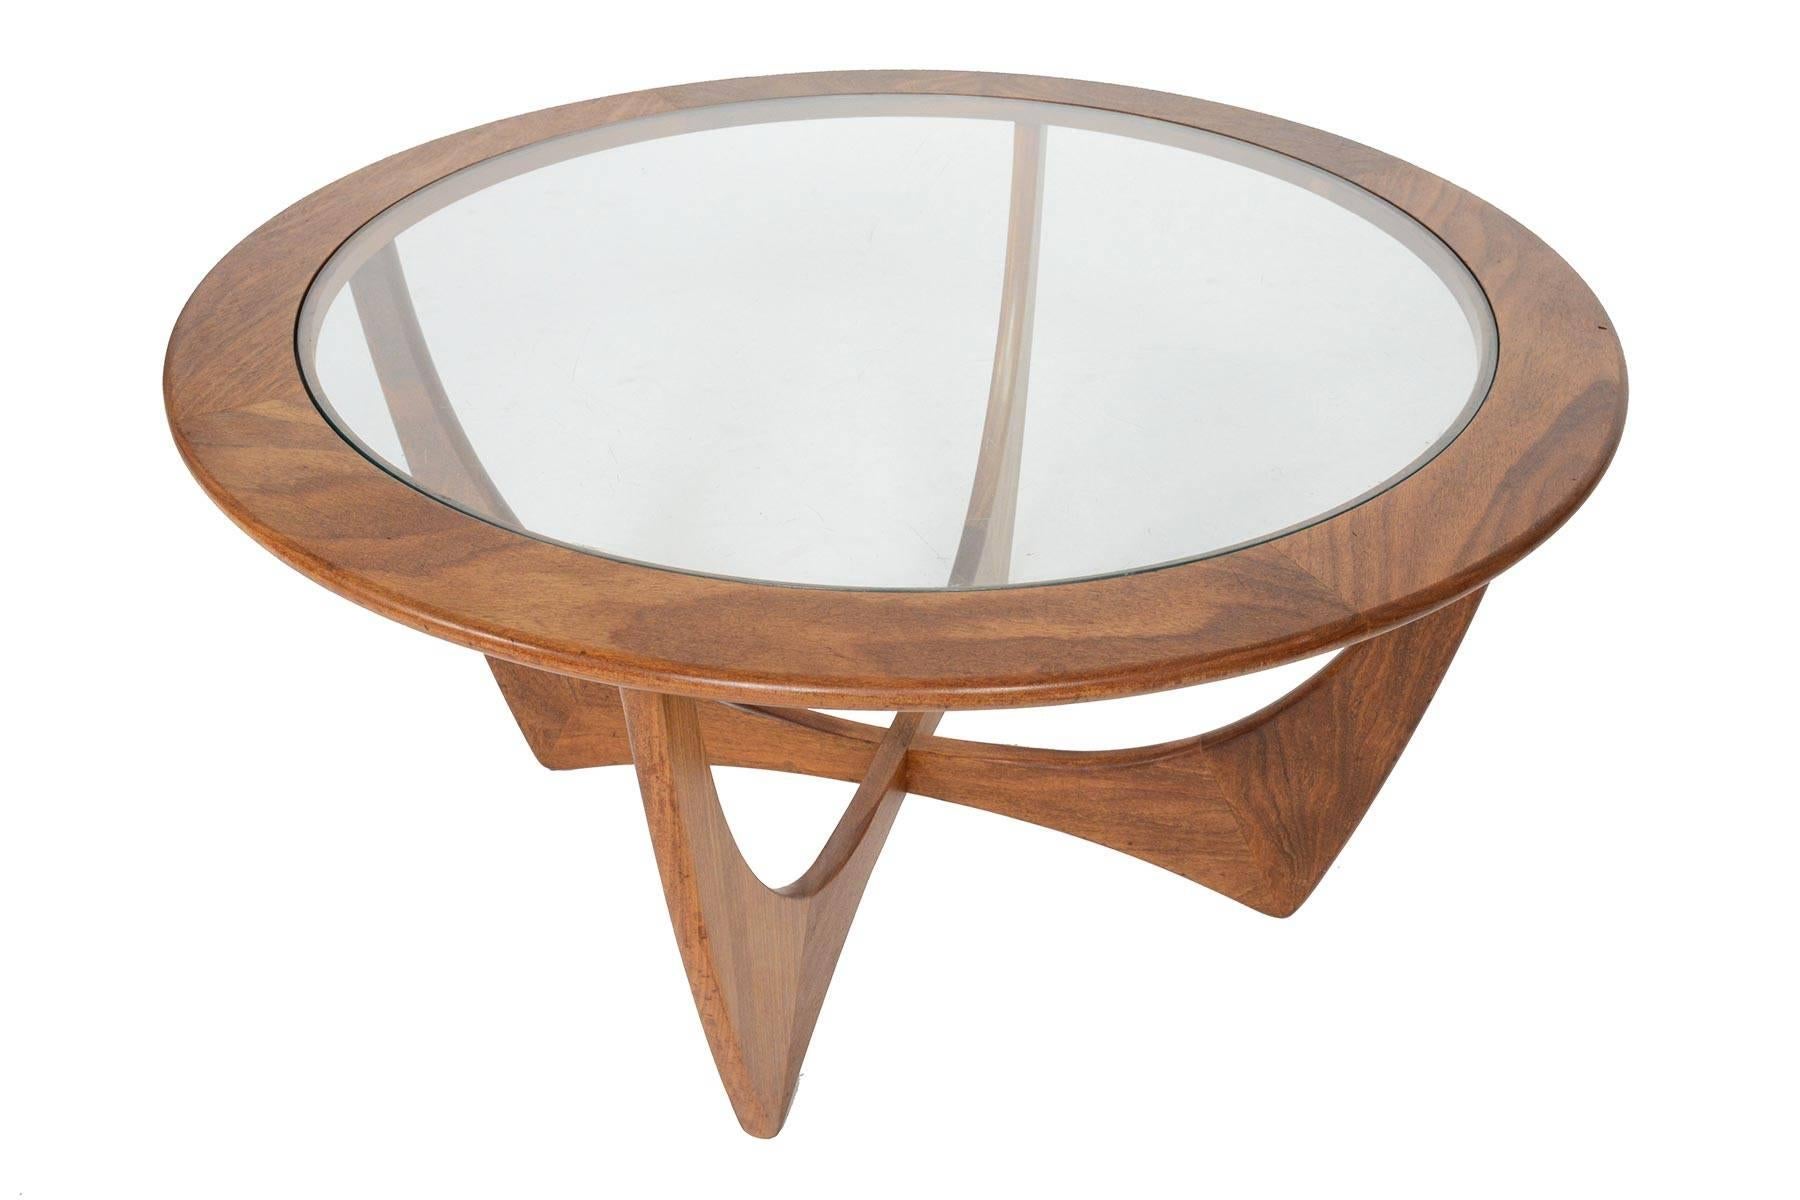 Mid-20th Century Round G Plan Astro Mid-Century Modern Coffee Table in Afromosia #1